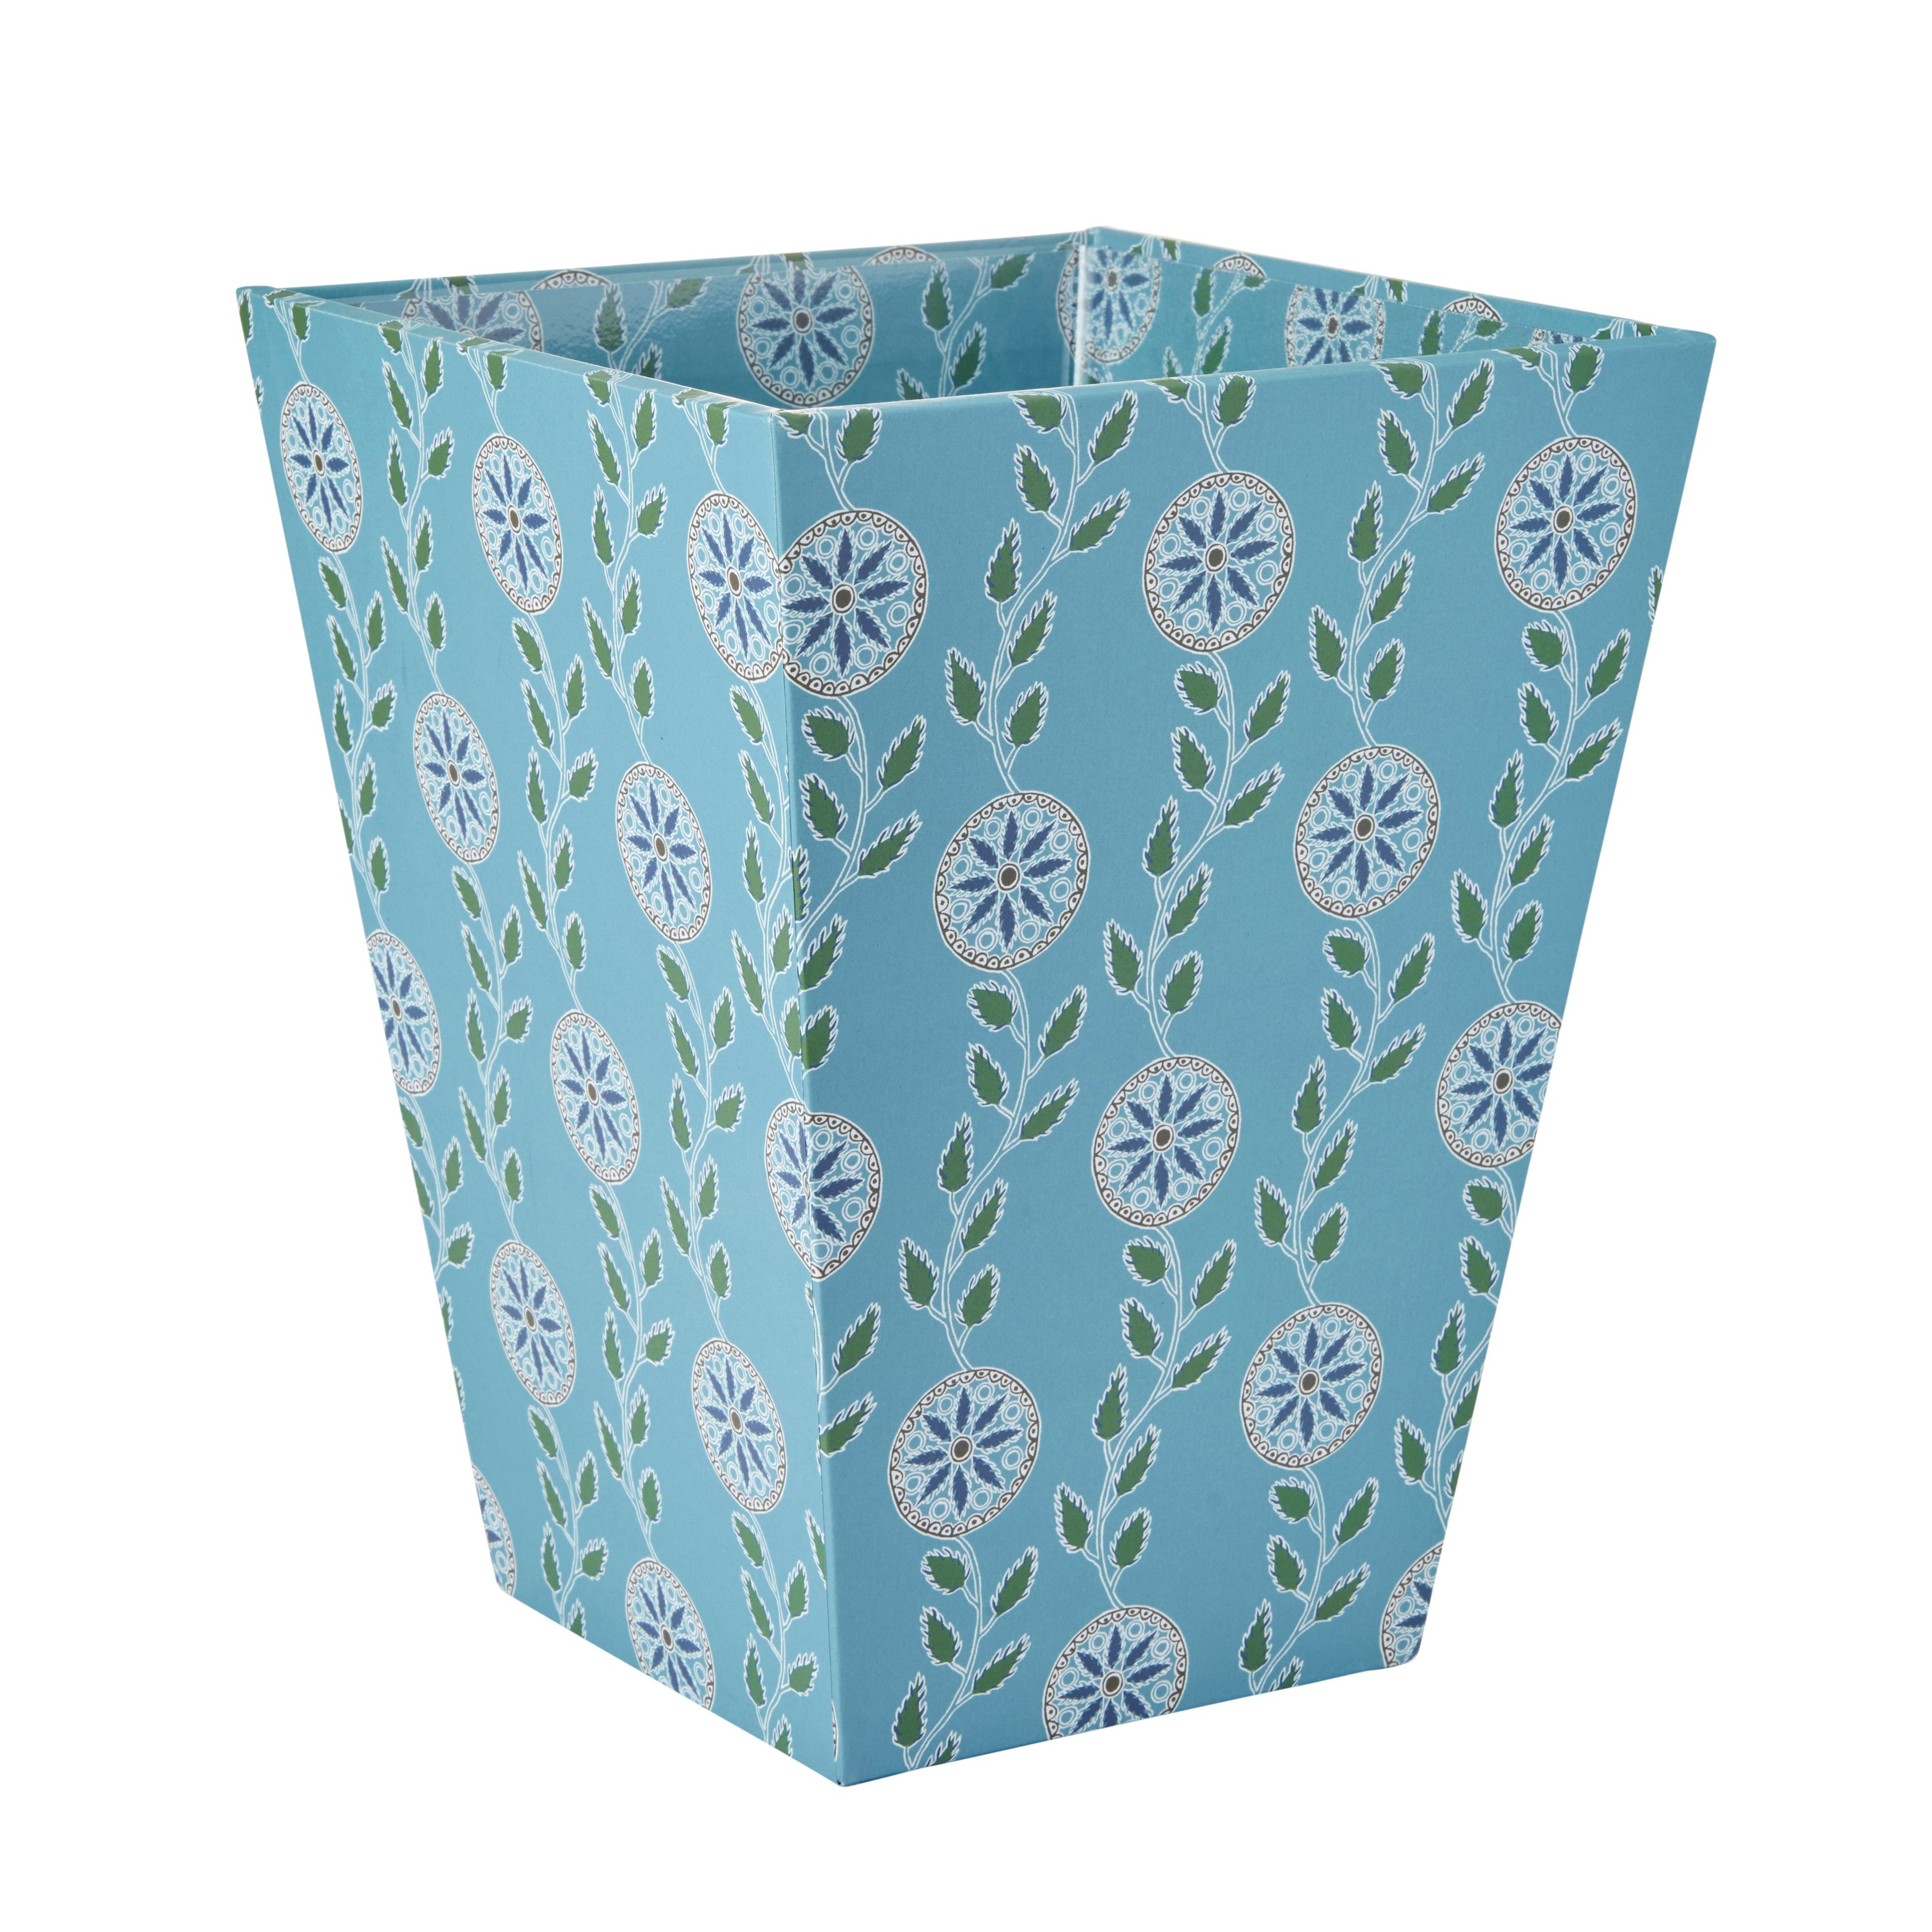 Nina Campbell waste bin in the blue colour way stationery collection on white background